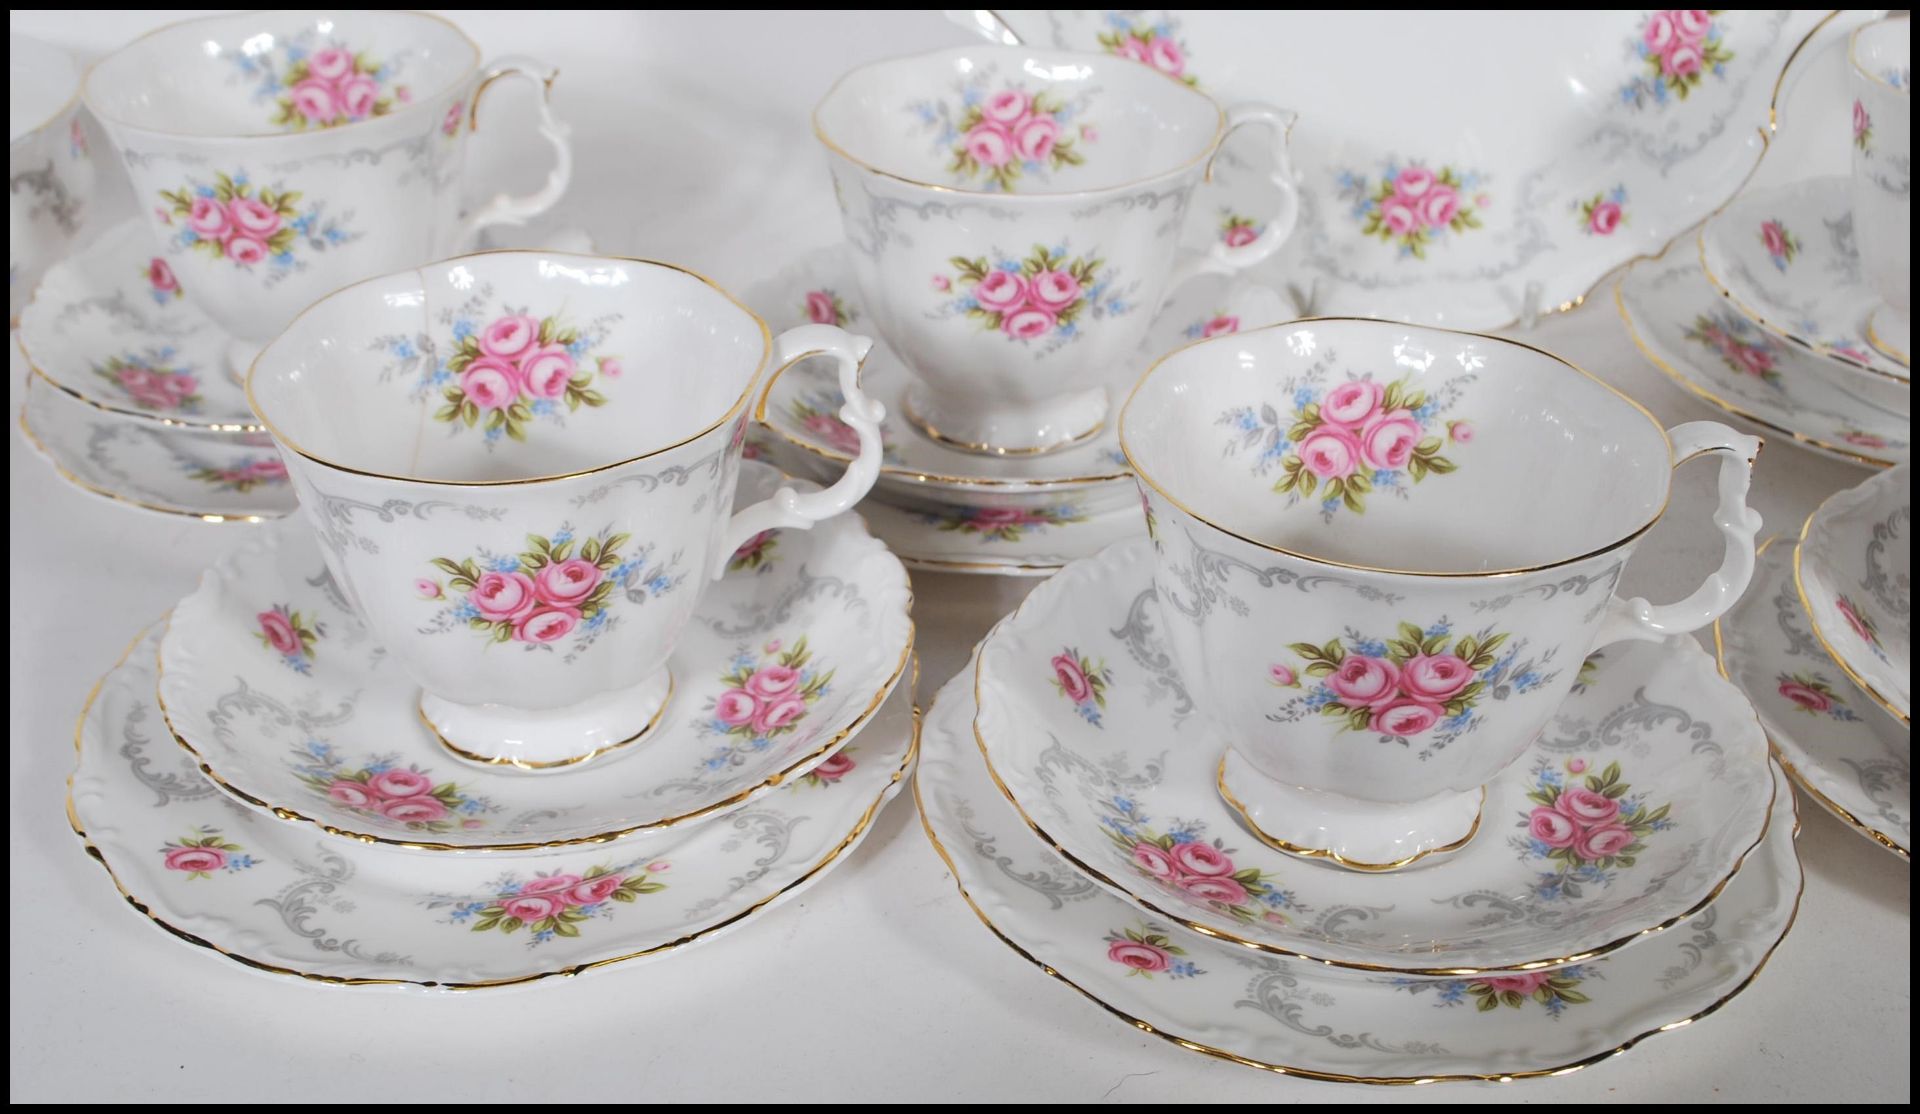 A Royal Albert tea service in the Tranquillity pattern having floral and gray foliate decoration - Image 3 of 8